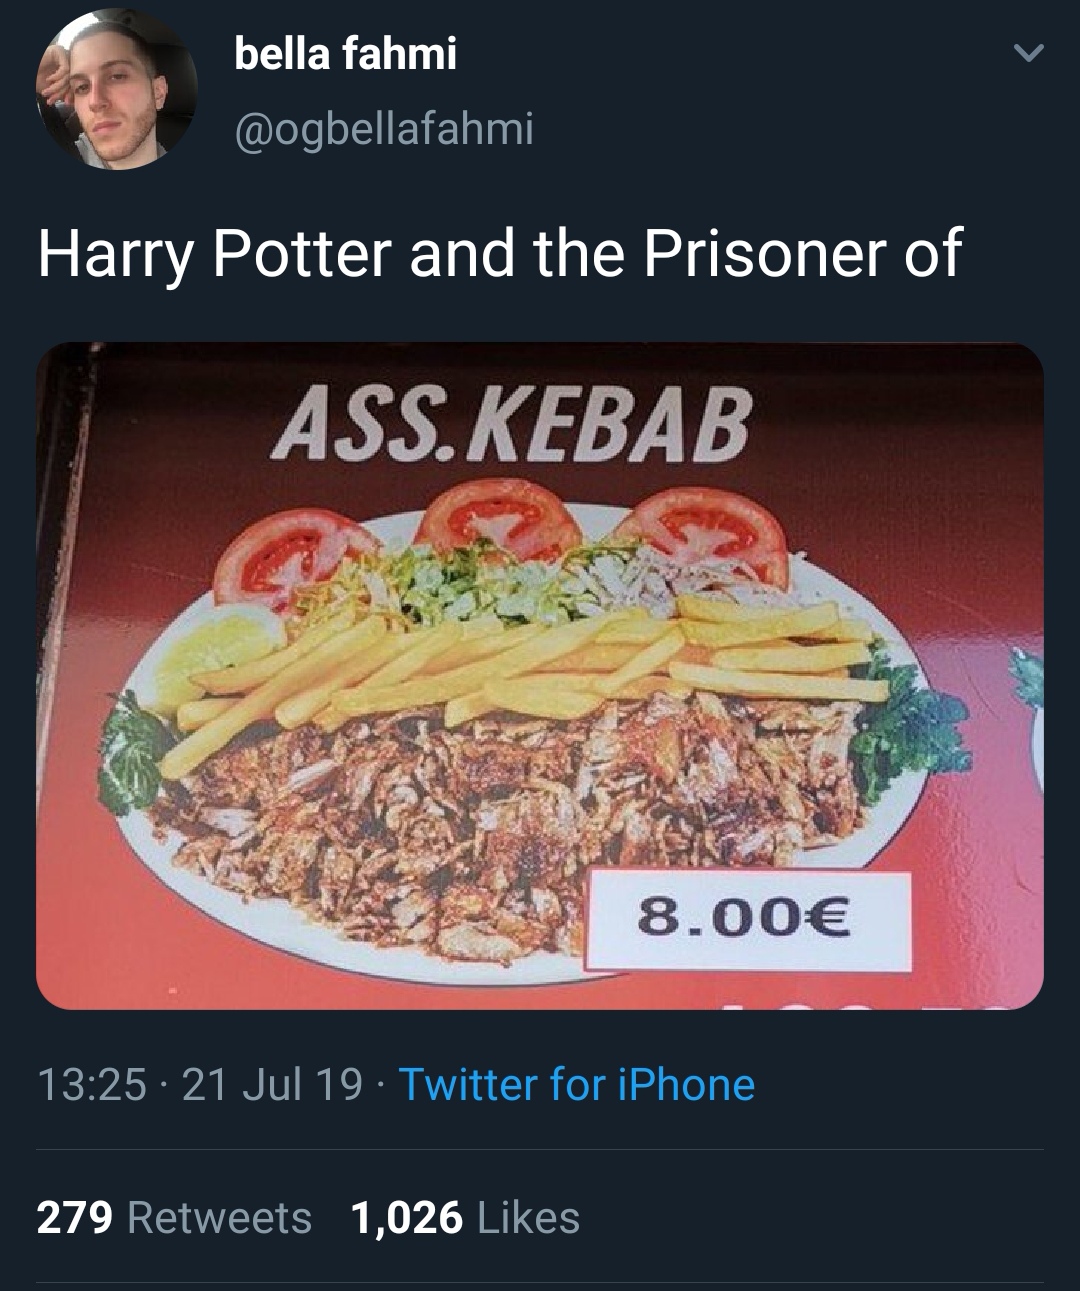 dish - bella fahmi Harry Potter and the Prisoner of Ass.Kebab 8.00 21 Jul 19 Twitter for iPhone 279 1,026